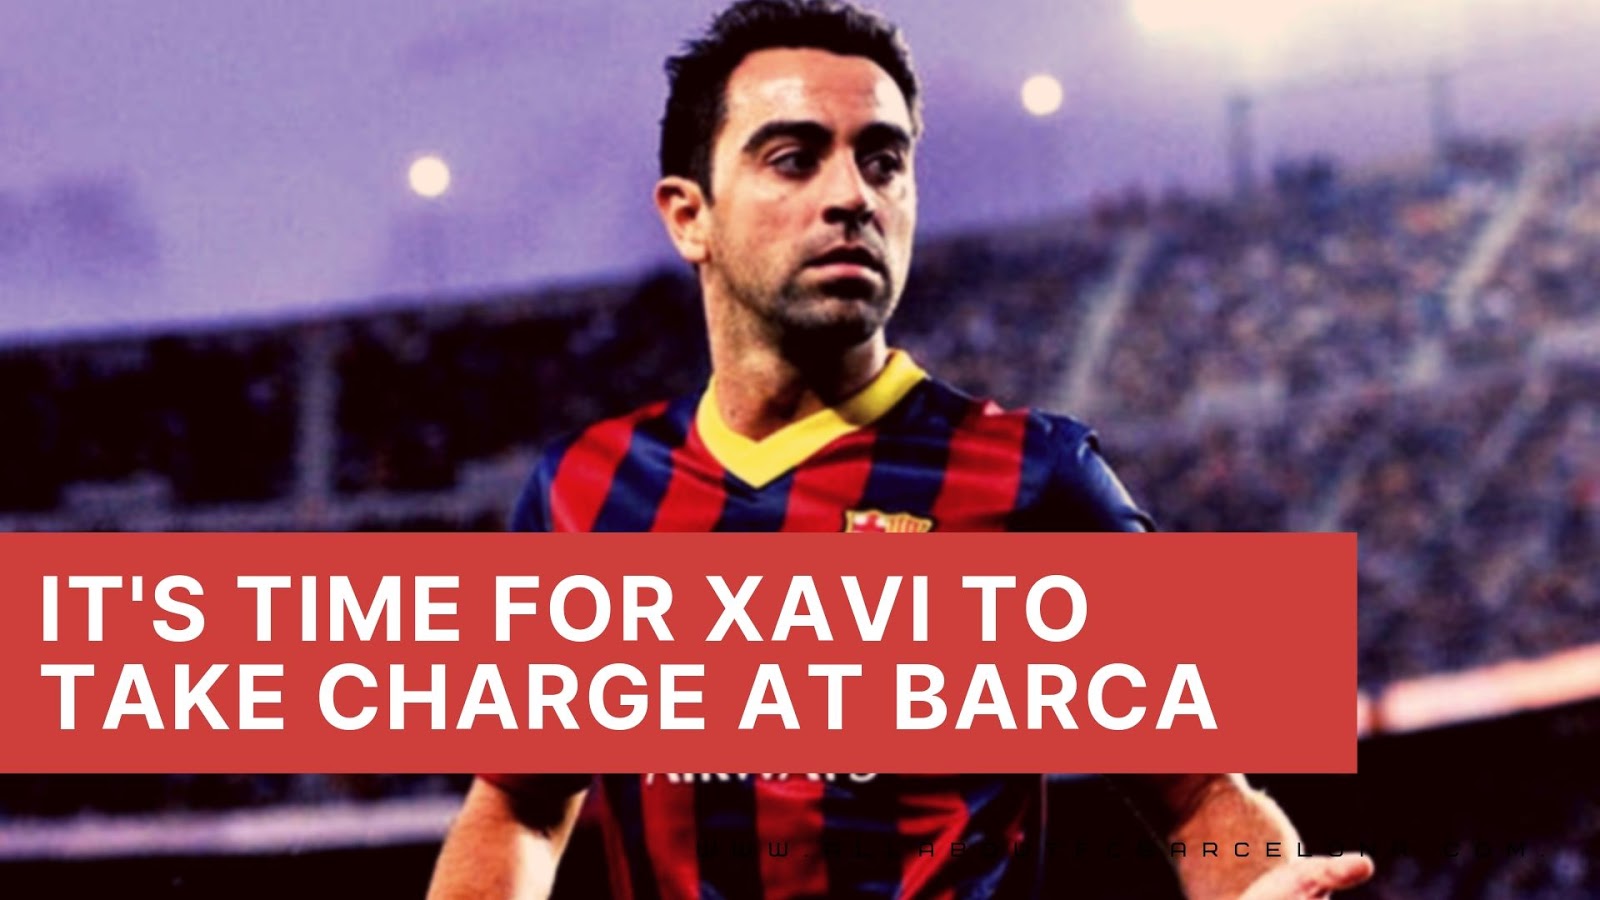 Barcelona Need to replace Valverde with Xavi Now. Otherwise it would be Too Late!